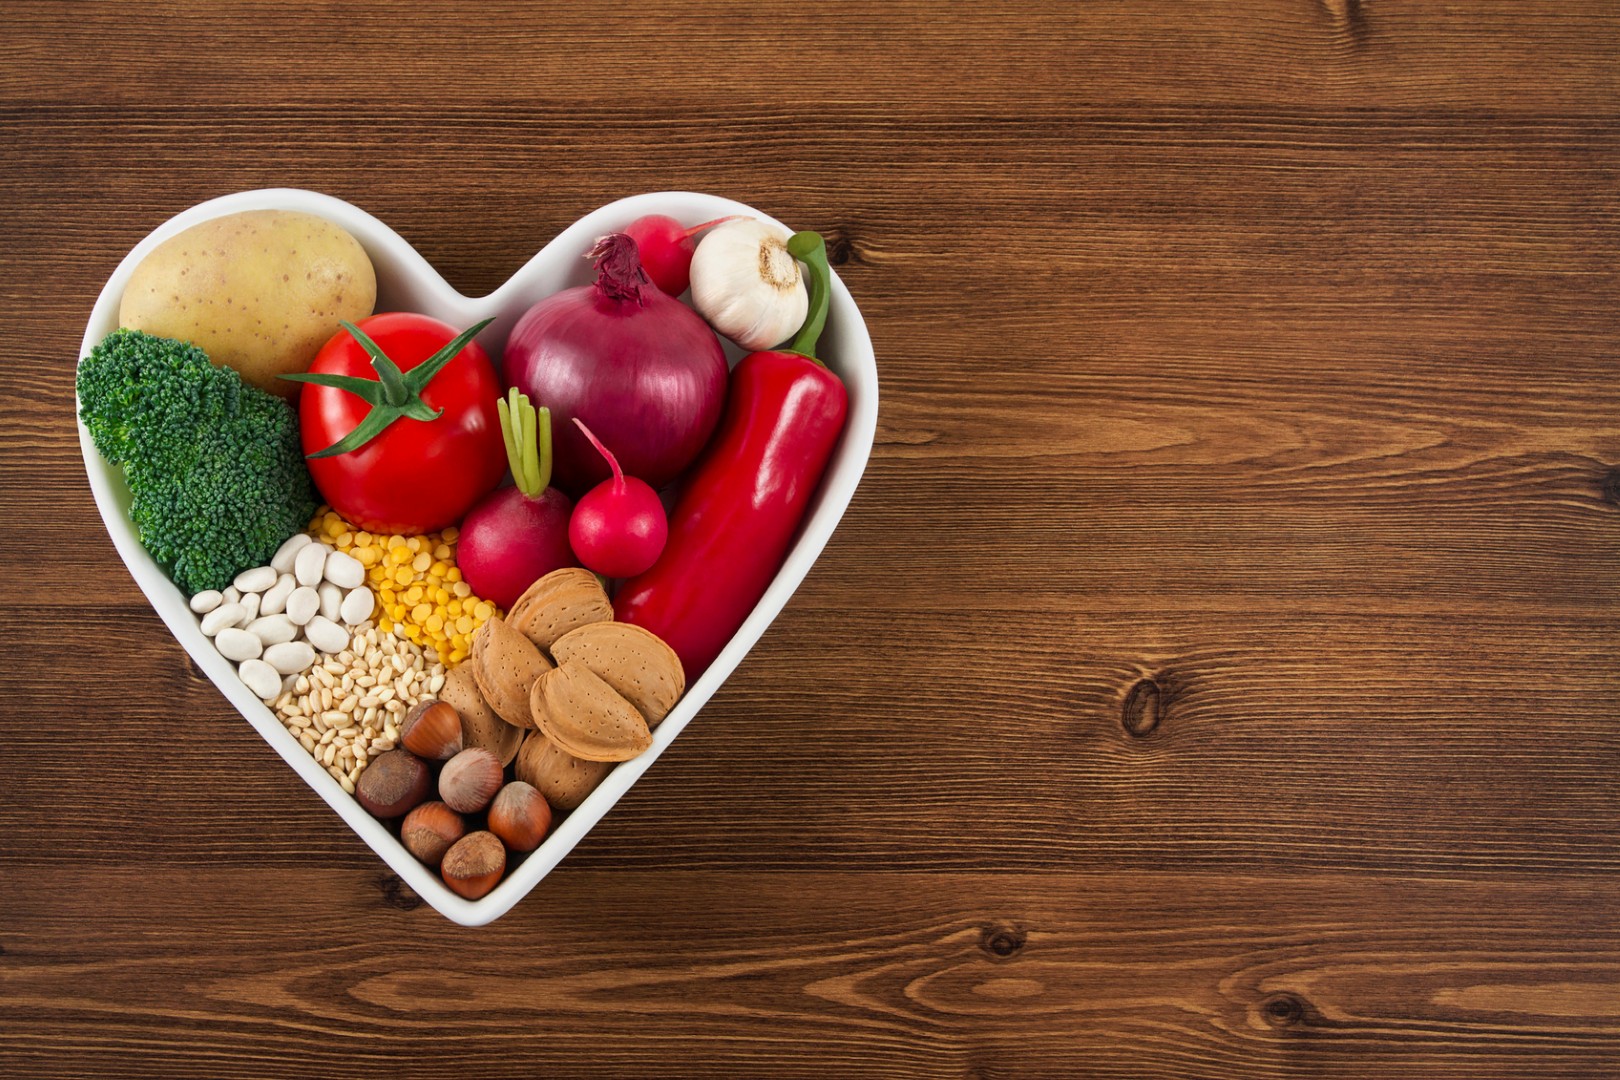 Heart health concept with related foods in white heart shaped bowl. potato red peppers, broccoli, radish, red onion, garlic, dry beans, almonds, nuts, and other pulses were arranged in heart space plate on white background.